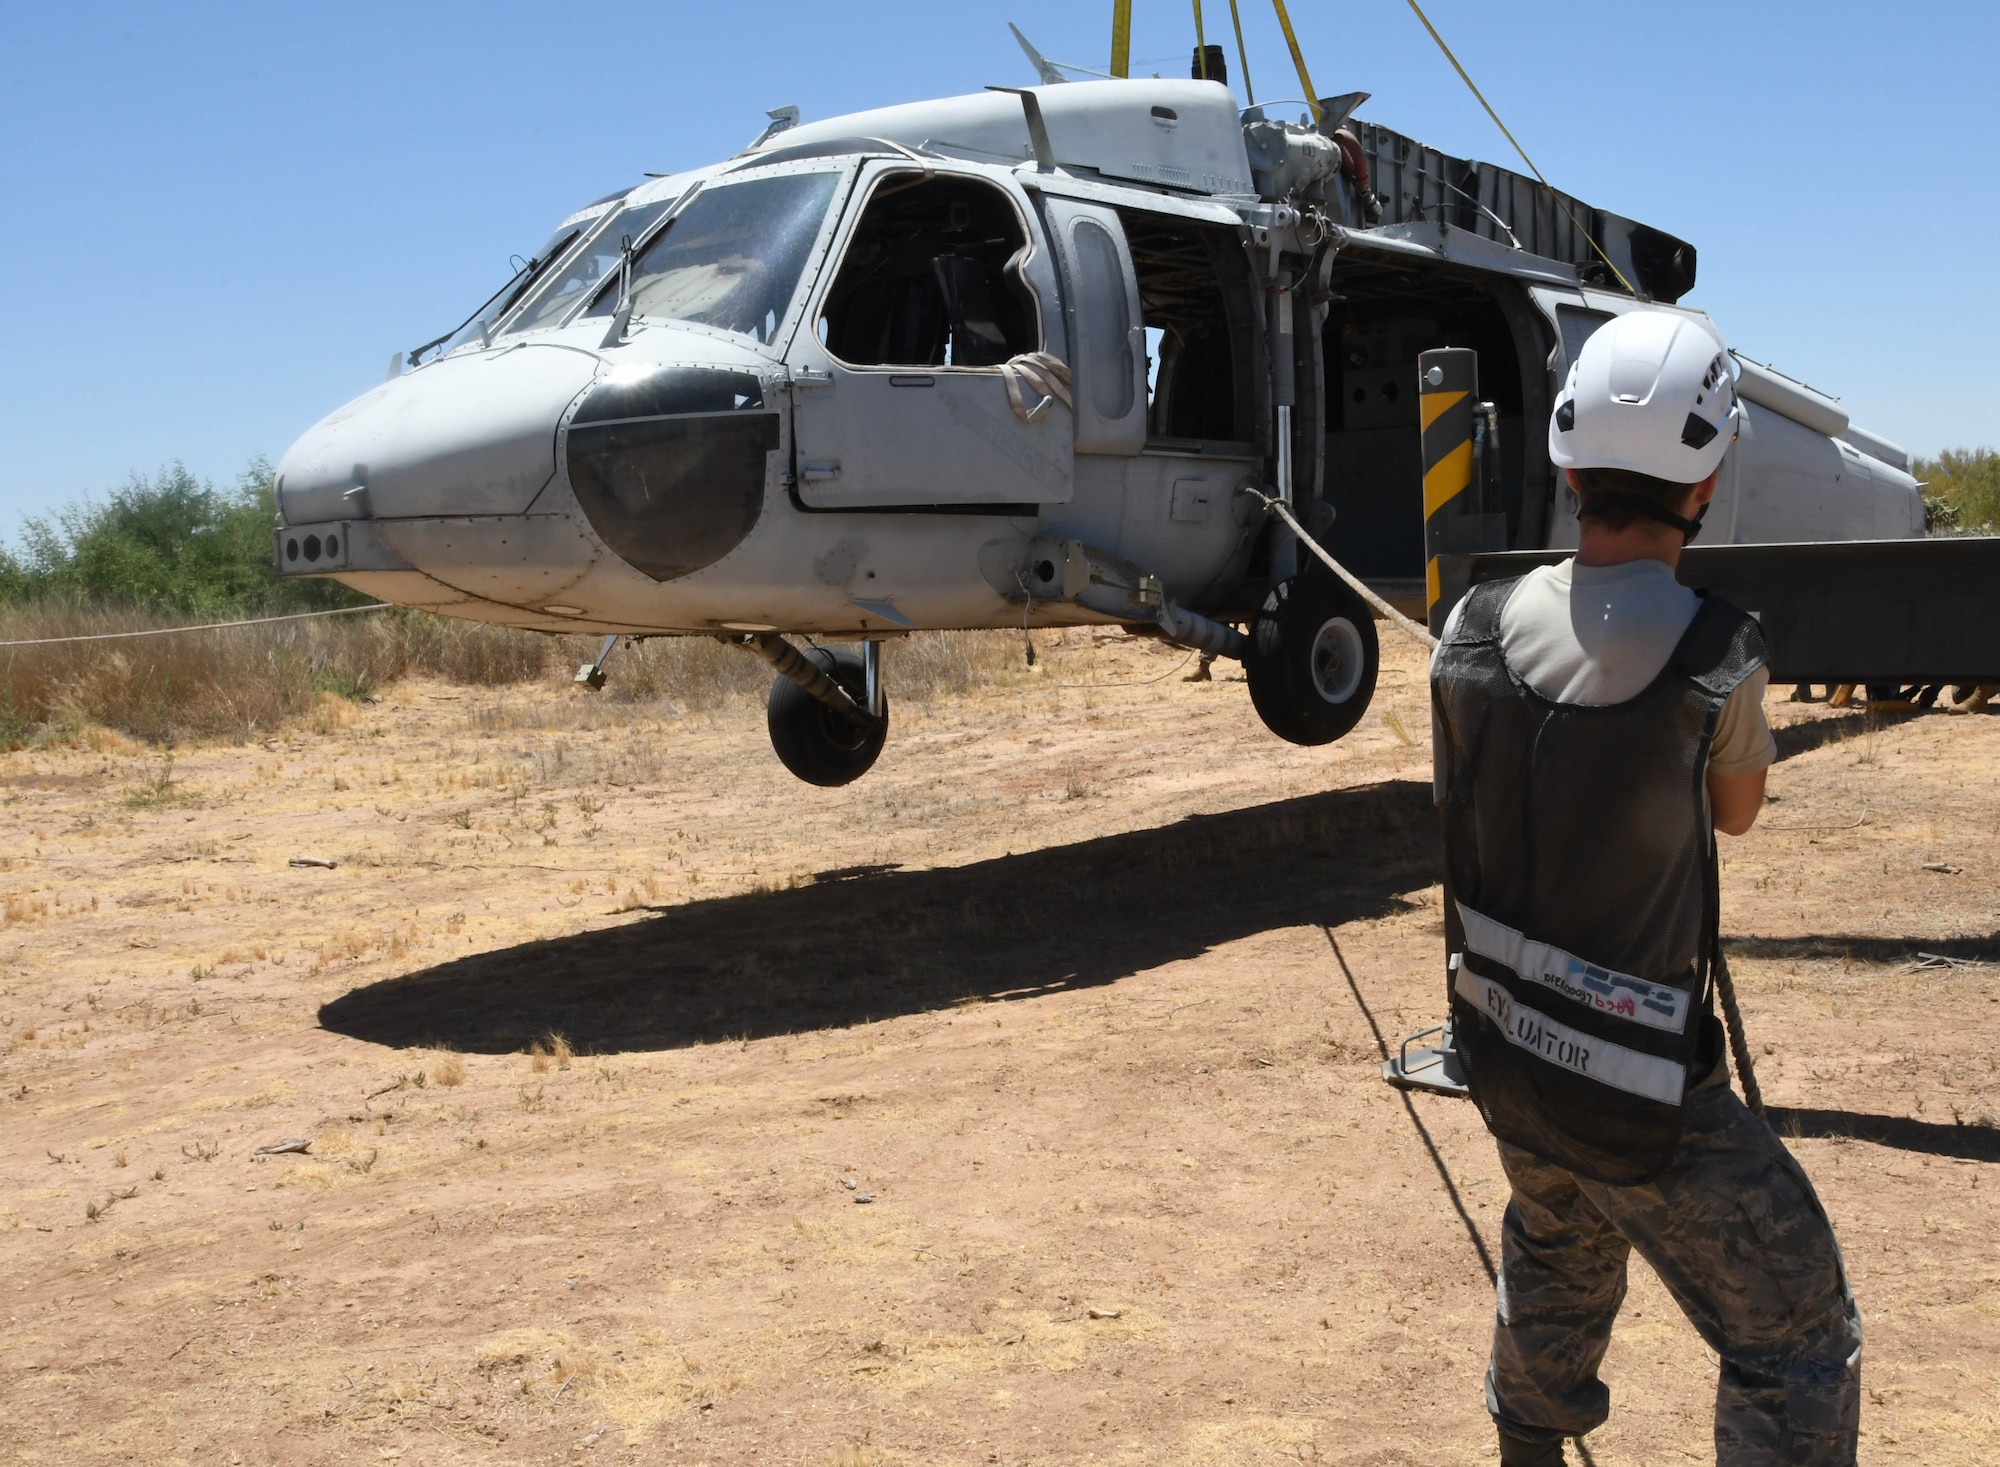 An Airman guides a helicopter onto the ground.